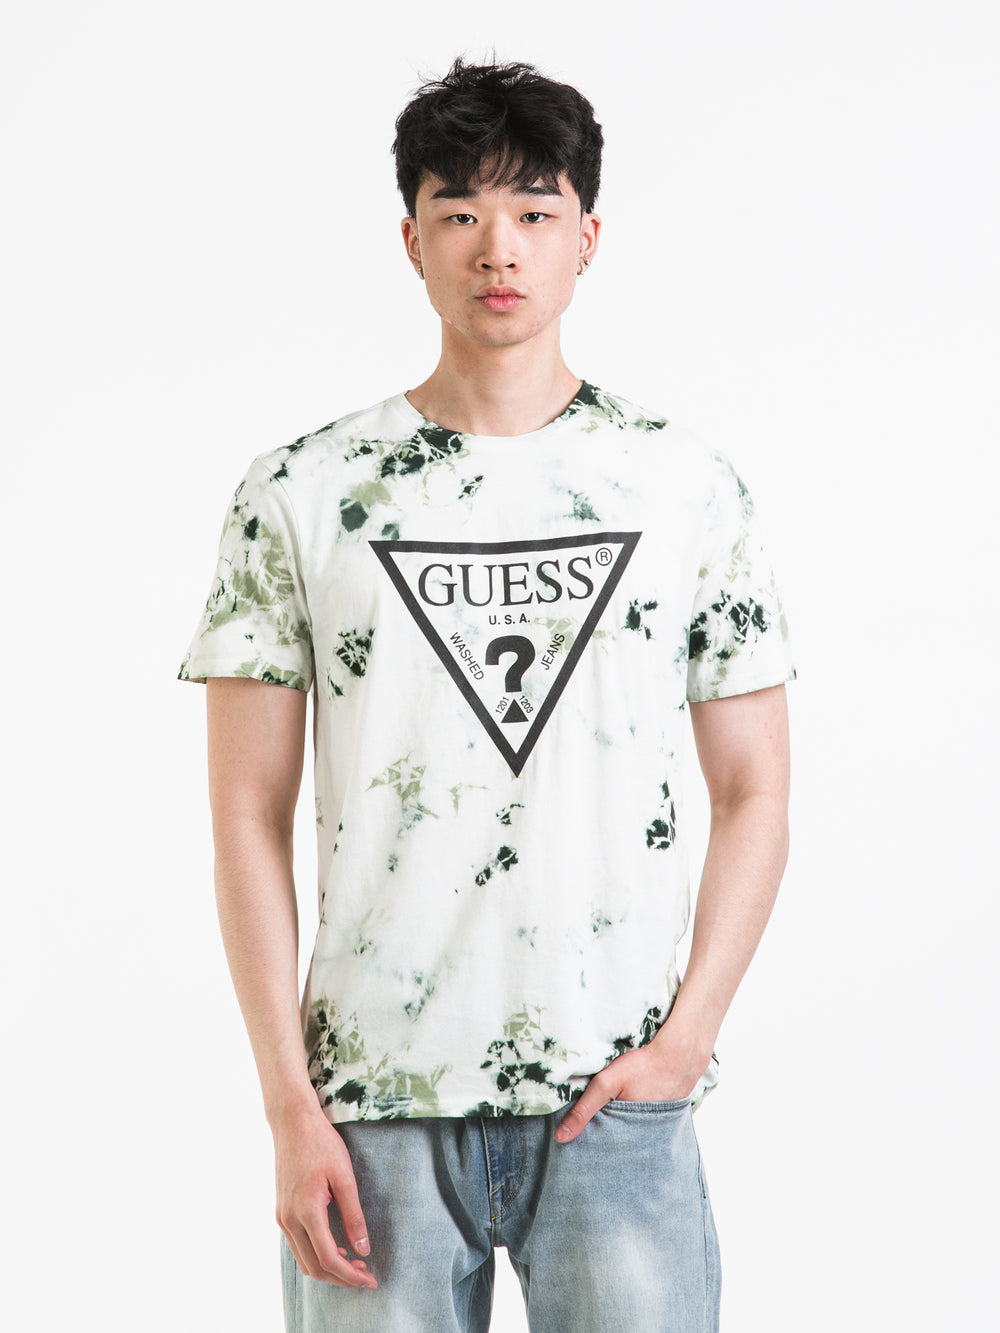 GUESS BSC TIE DYE TRIANGLE LOGO T-SHIRT - CLEARANCE